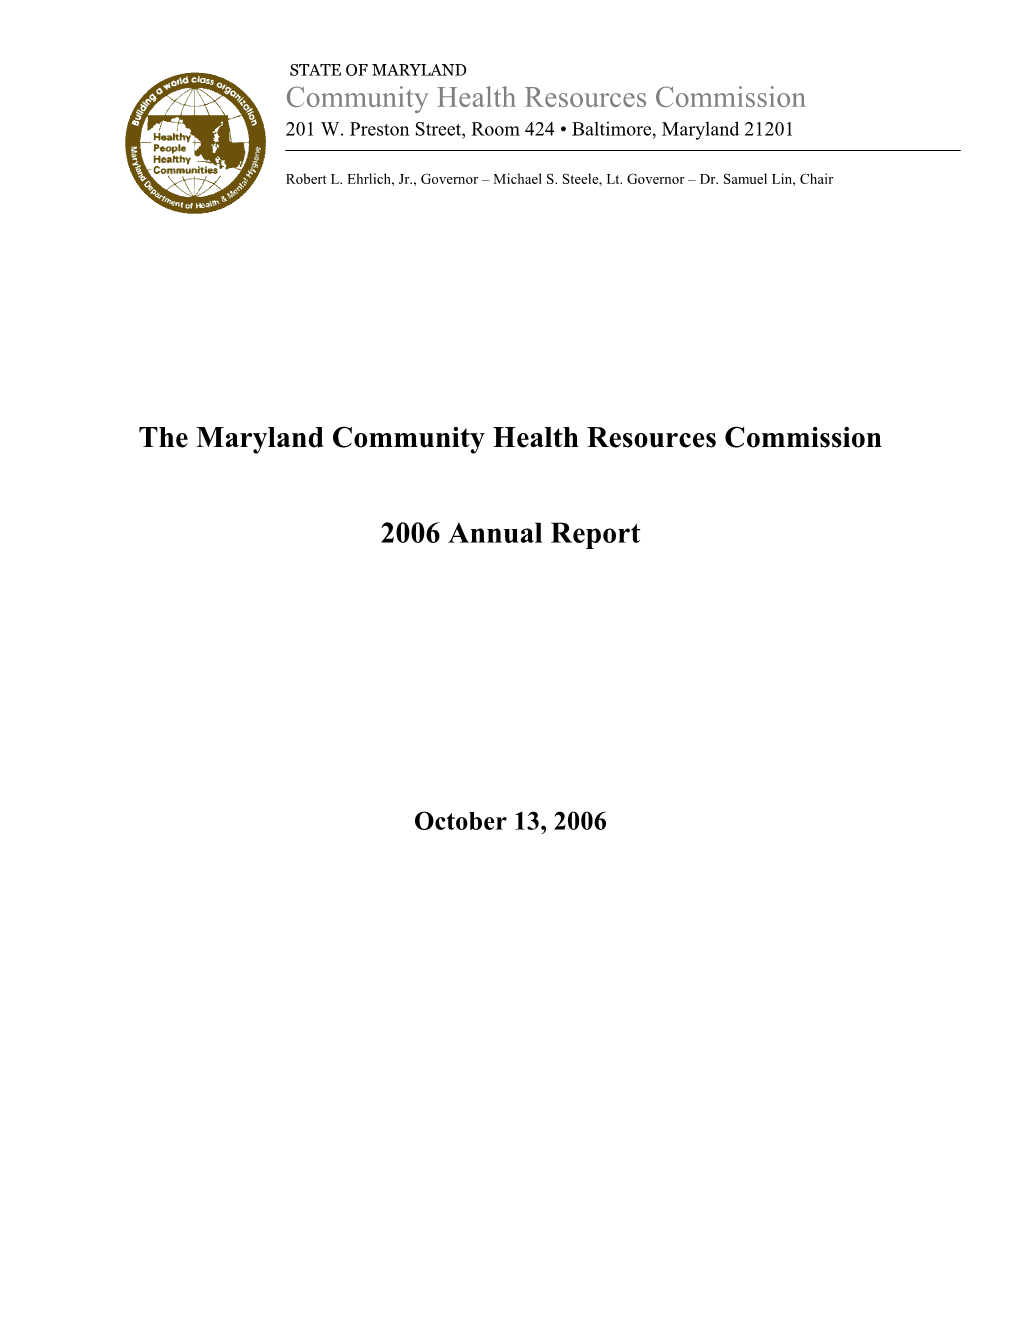 Maryland Community Health Resources Commission FY 2006 Annual Report